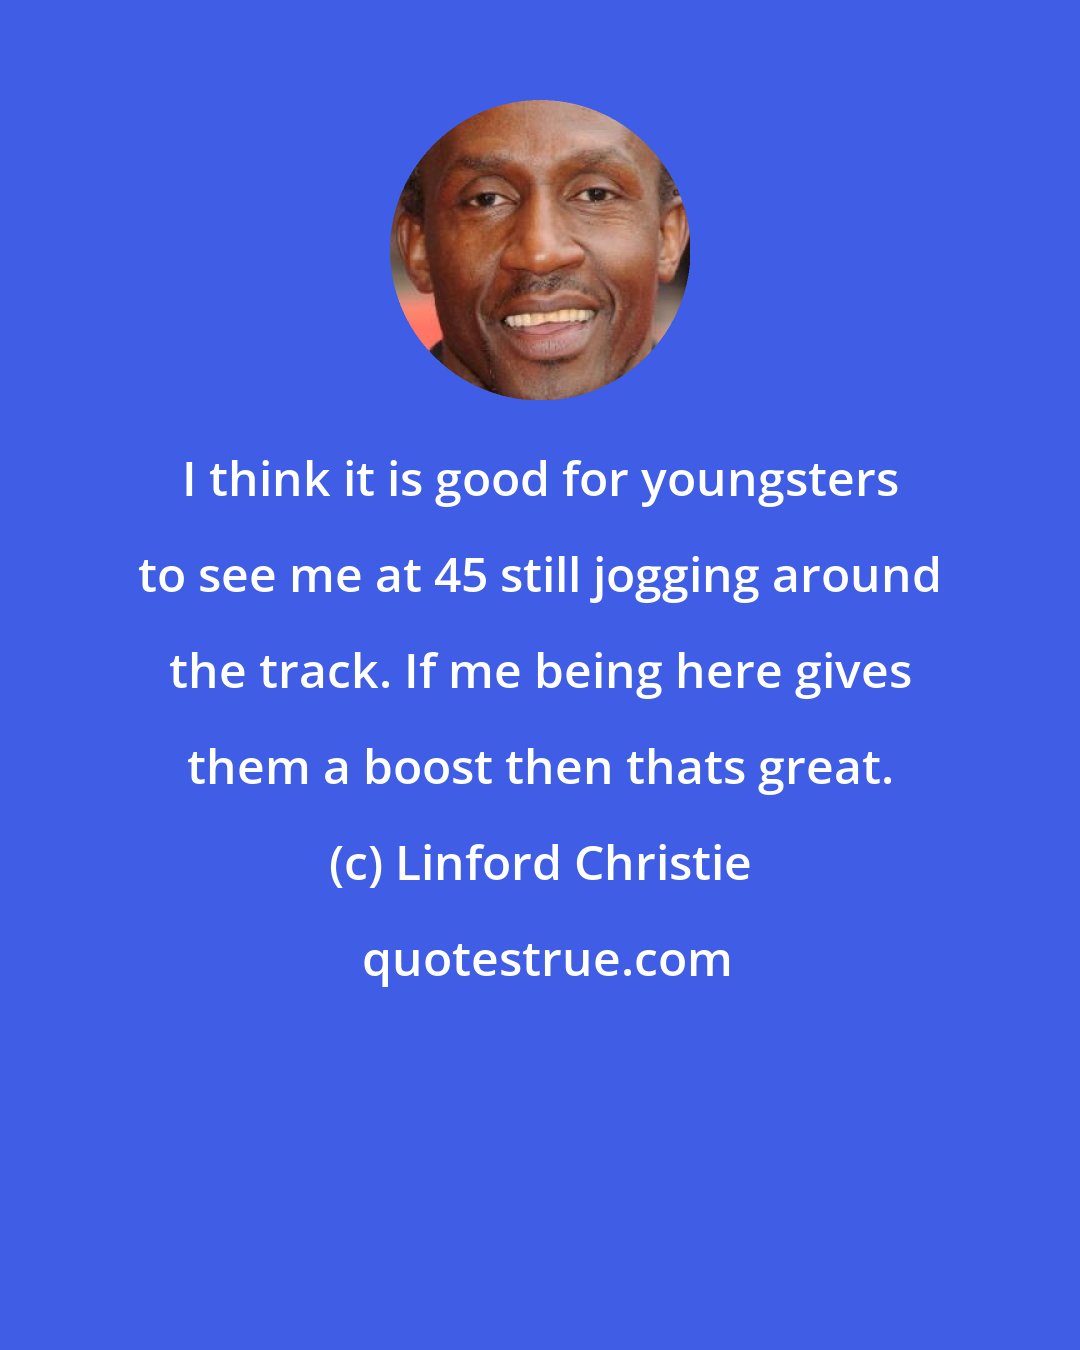 Linford Christie: I think it is good for youngsters to see me at 45 still jogging around the track. If me being here gives them a boost then thats great.